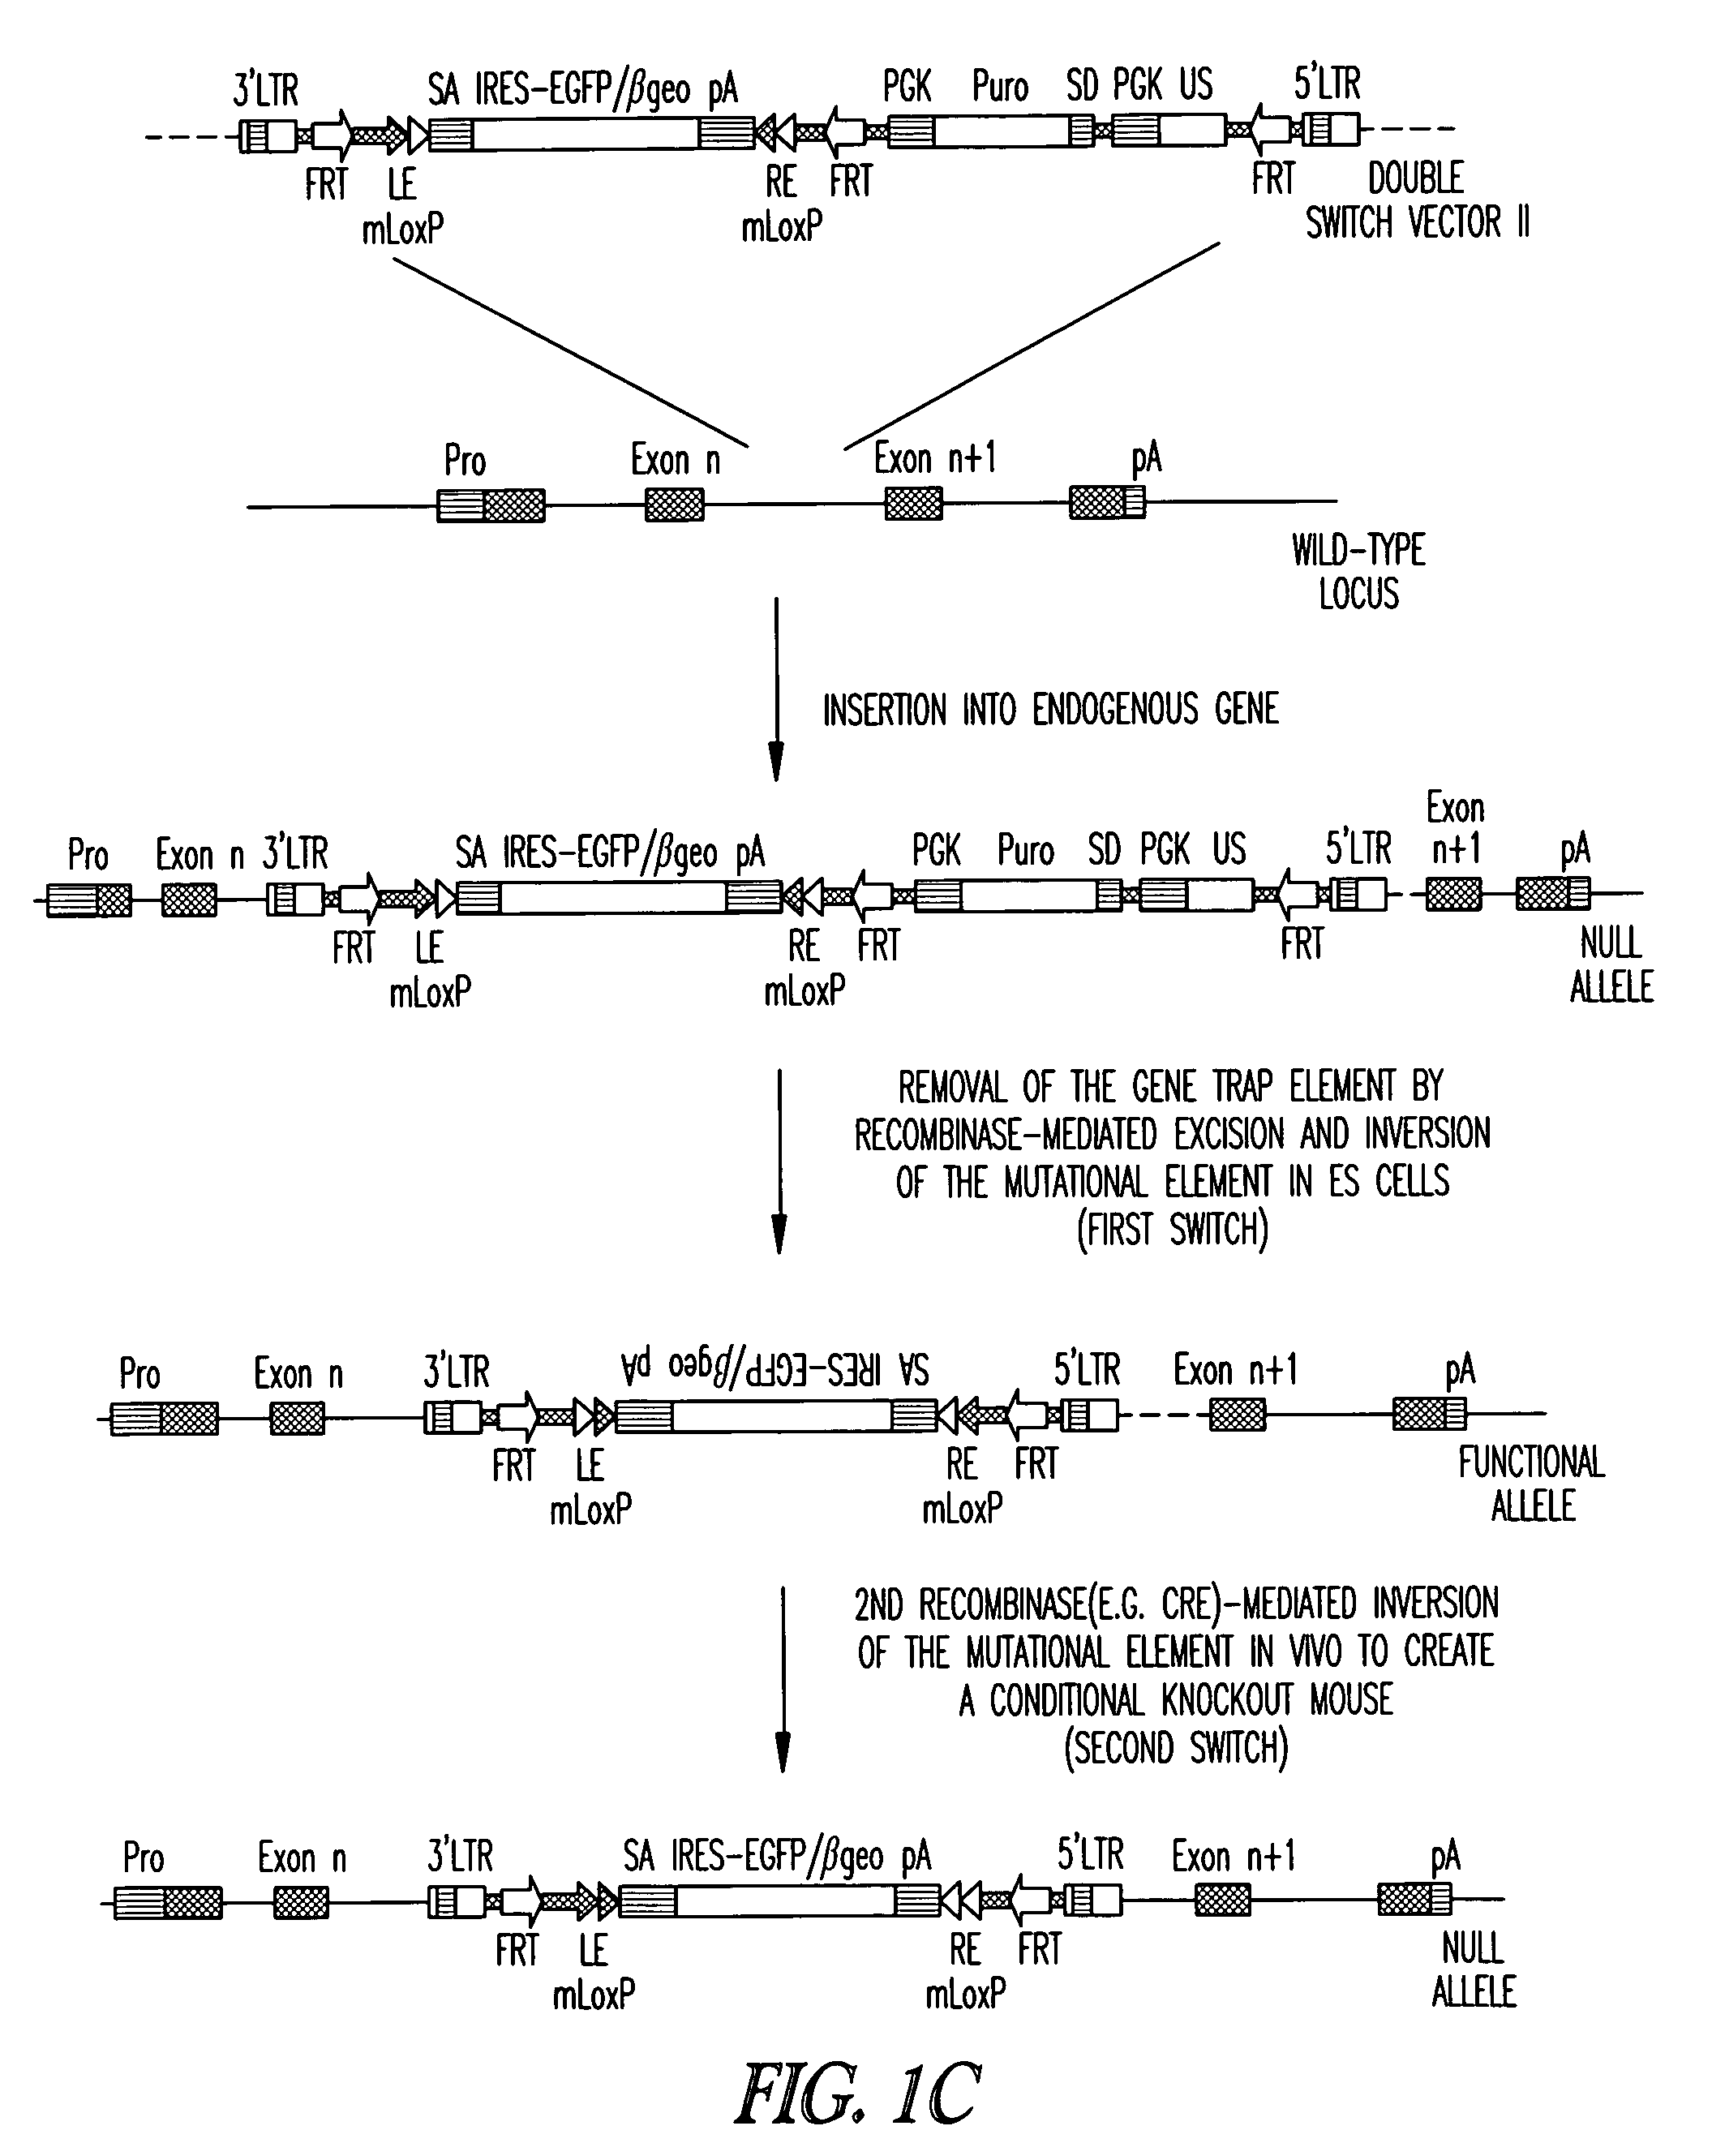 Vectors for conditional gene inactivation